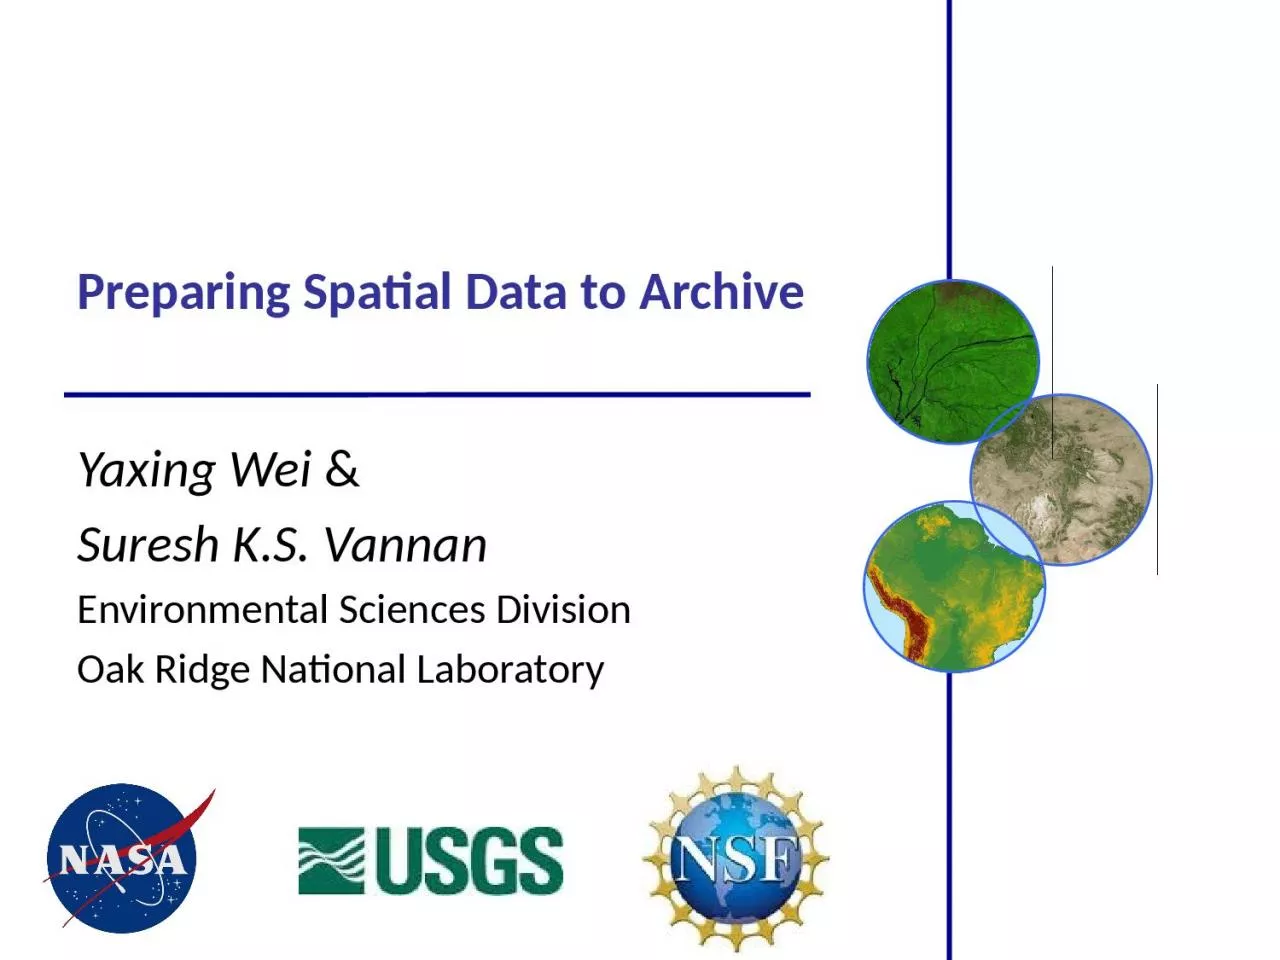 Preparing Spatial Data to Archive